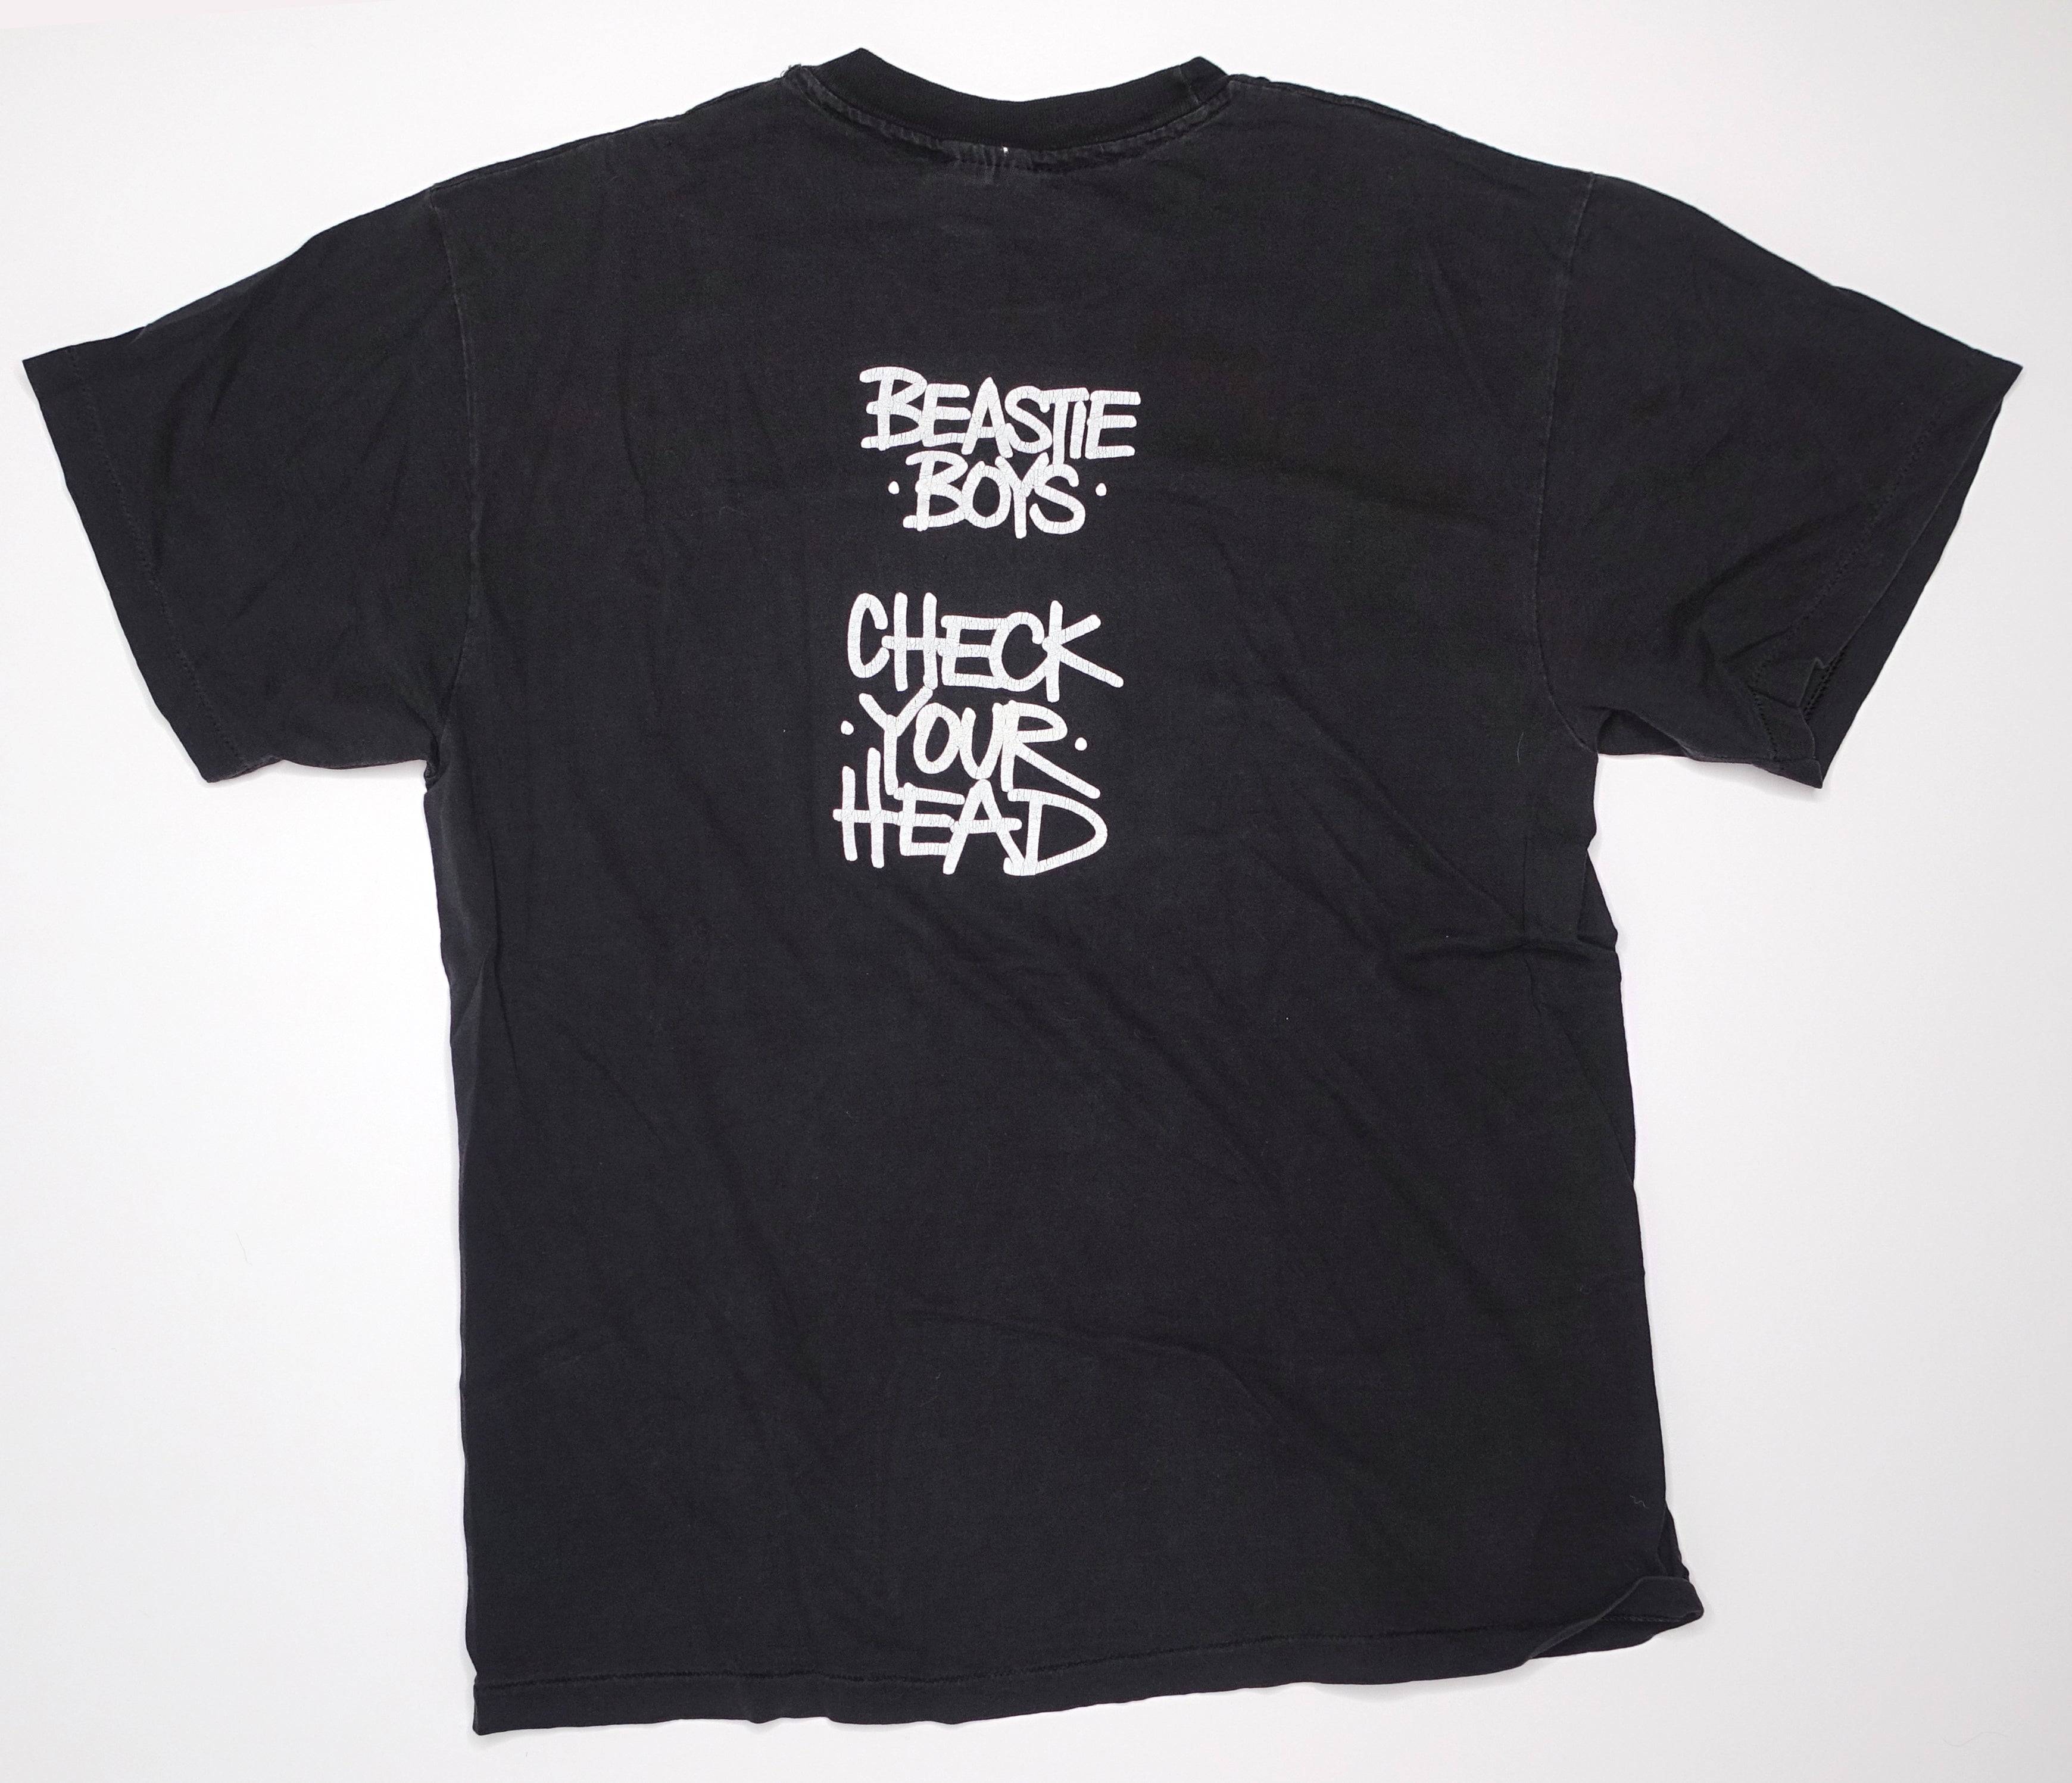 Beastie Boys - Check Your Head 1992 Tour Shirt Size Large